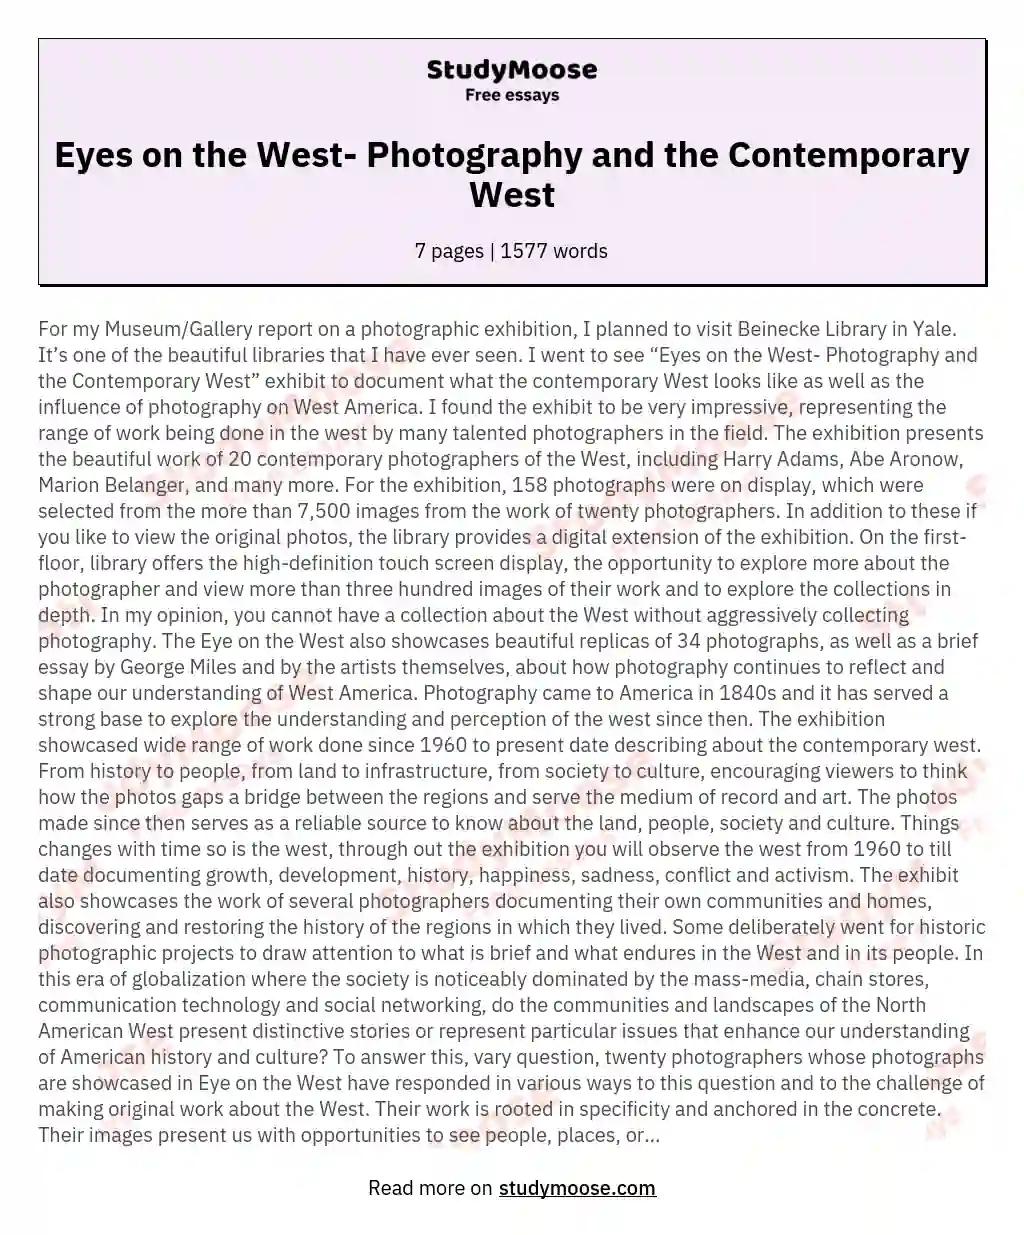 Eyes on the West- Photography and the Contemporary West essay